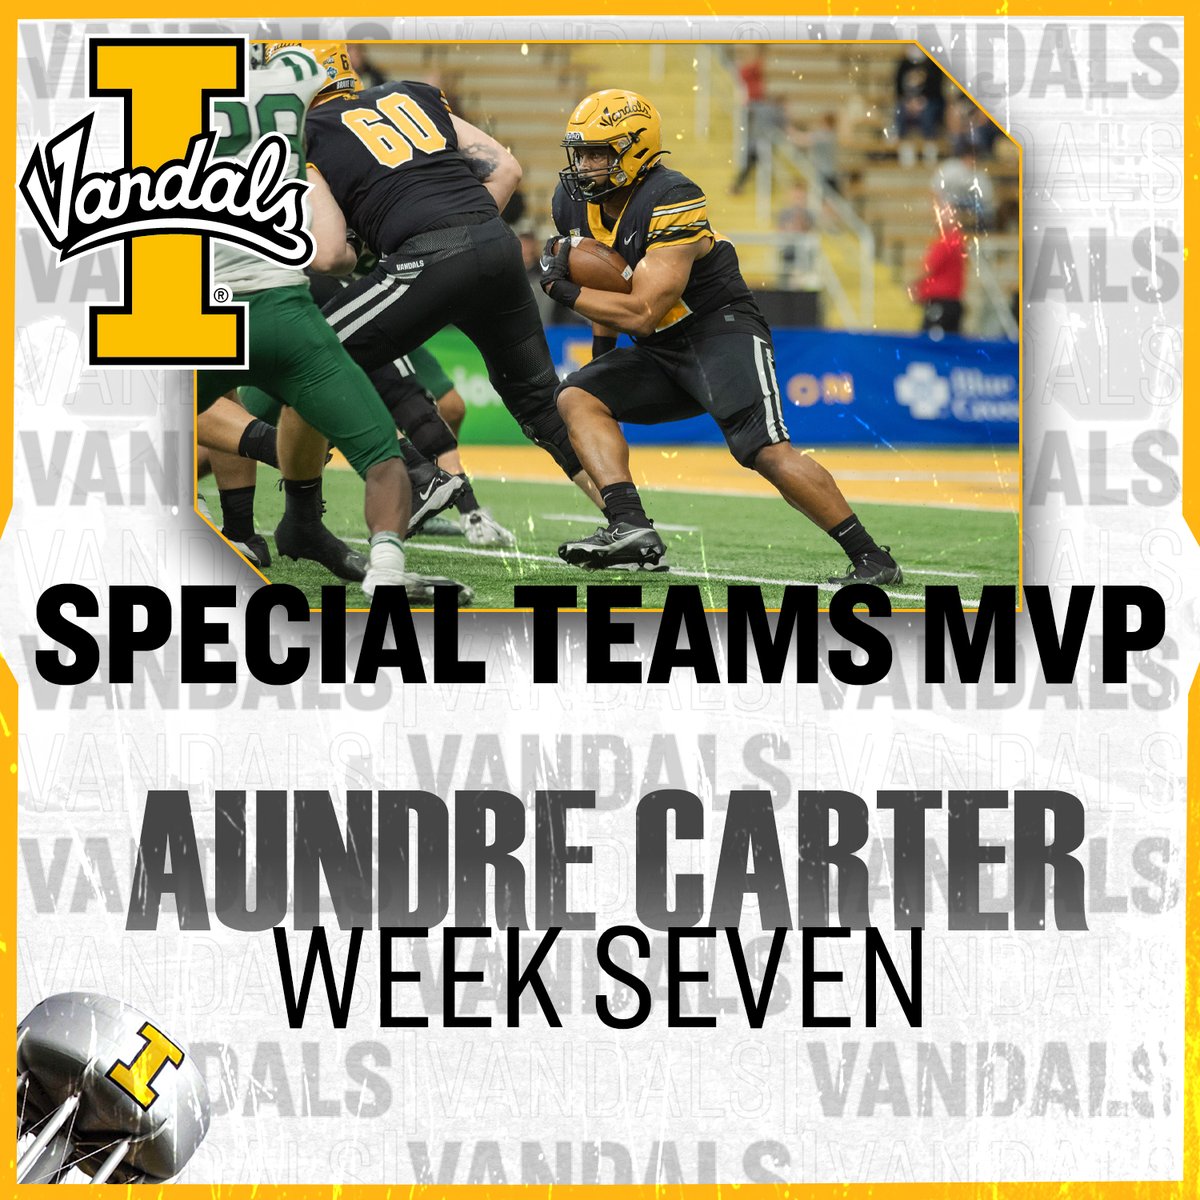 .@aundre_carter18 took care of business on every phase of the special teams game and also busted off the longest Vandal play of the season in a punishing 83-yard run to the one-yard-line. #GoVandals